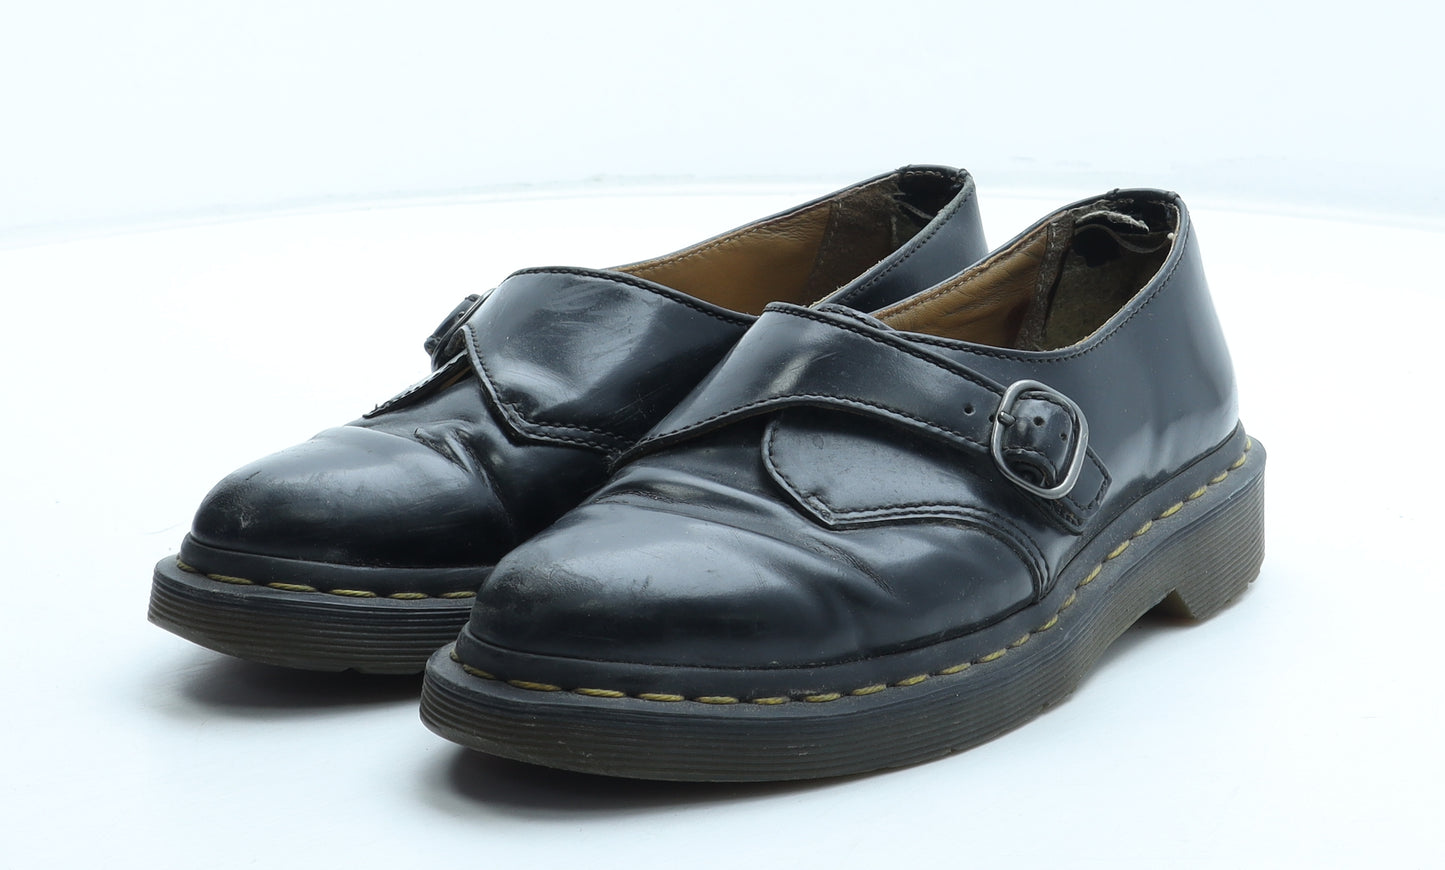 Dr. Martens Womens Black Leather Slip On Casual UK